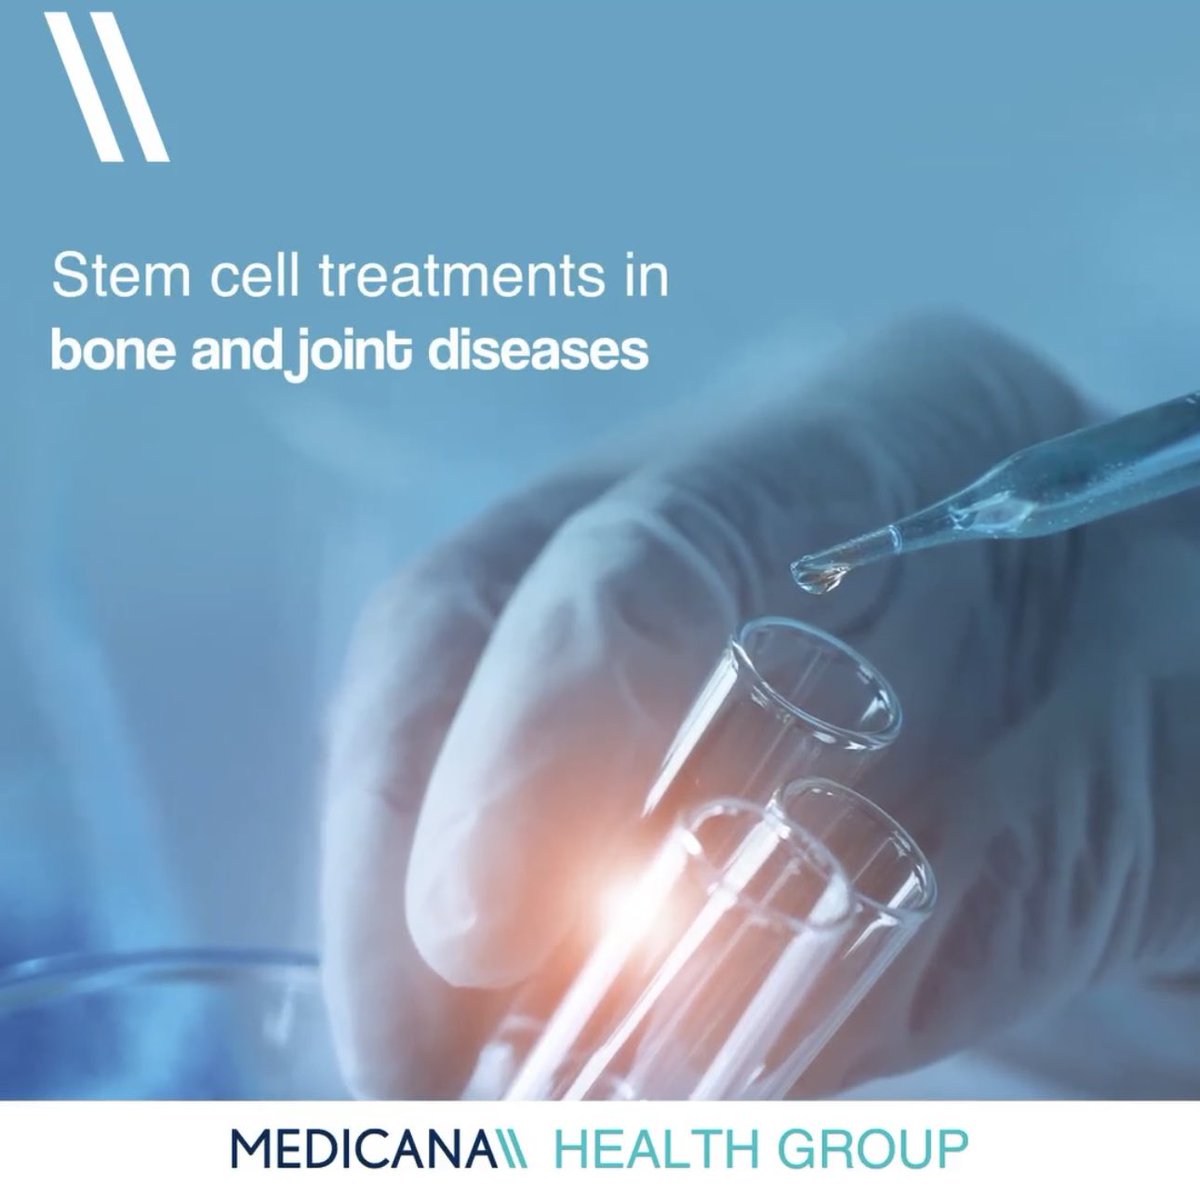 Stem Cell Therapy-stem cells are the body’s raw materials from which all other cells with specialized functions are formed. 

In recent years, stem cell therapies have gained significant popularity as a means to facilitate the healing process of injured tissues. 

Stem cell…